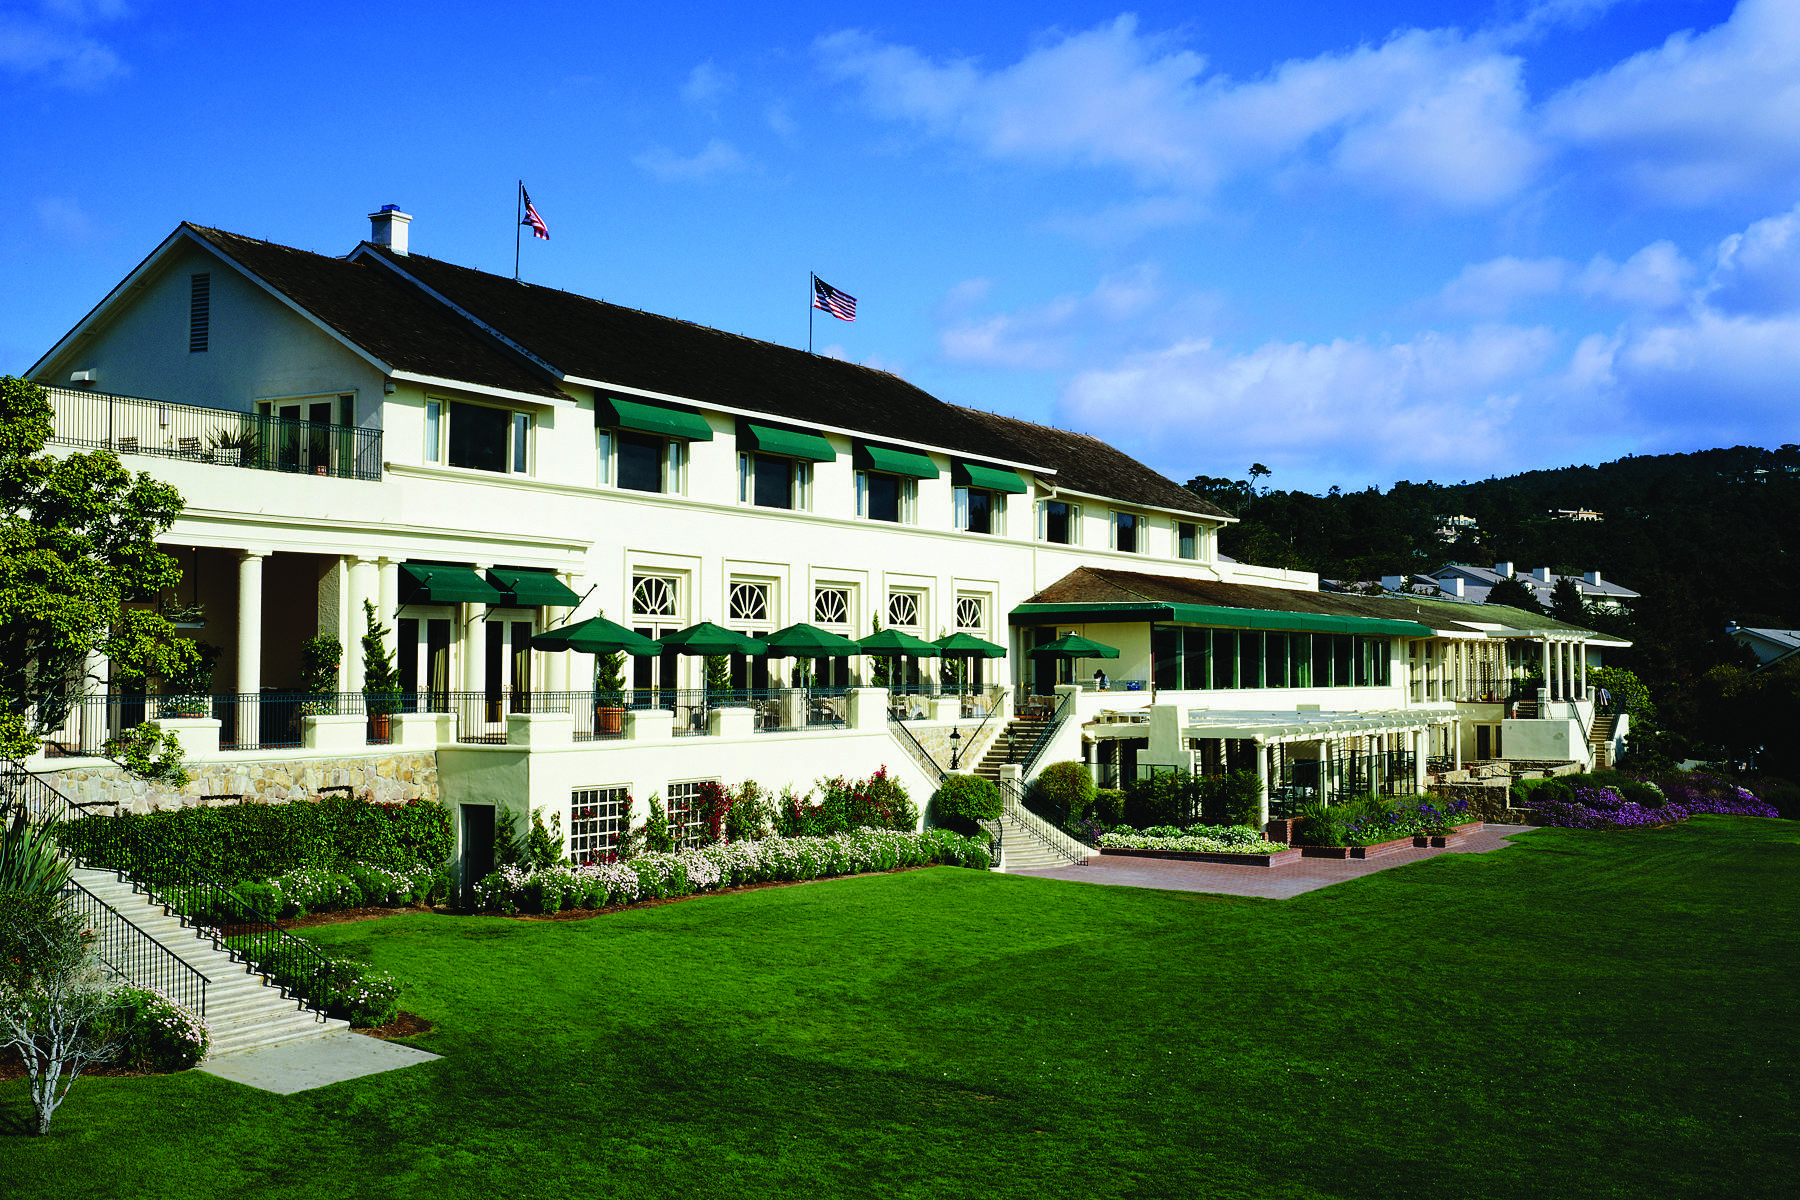 The Top Hotels in Monterey County